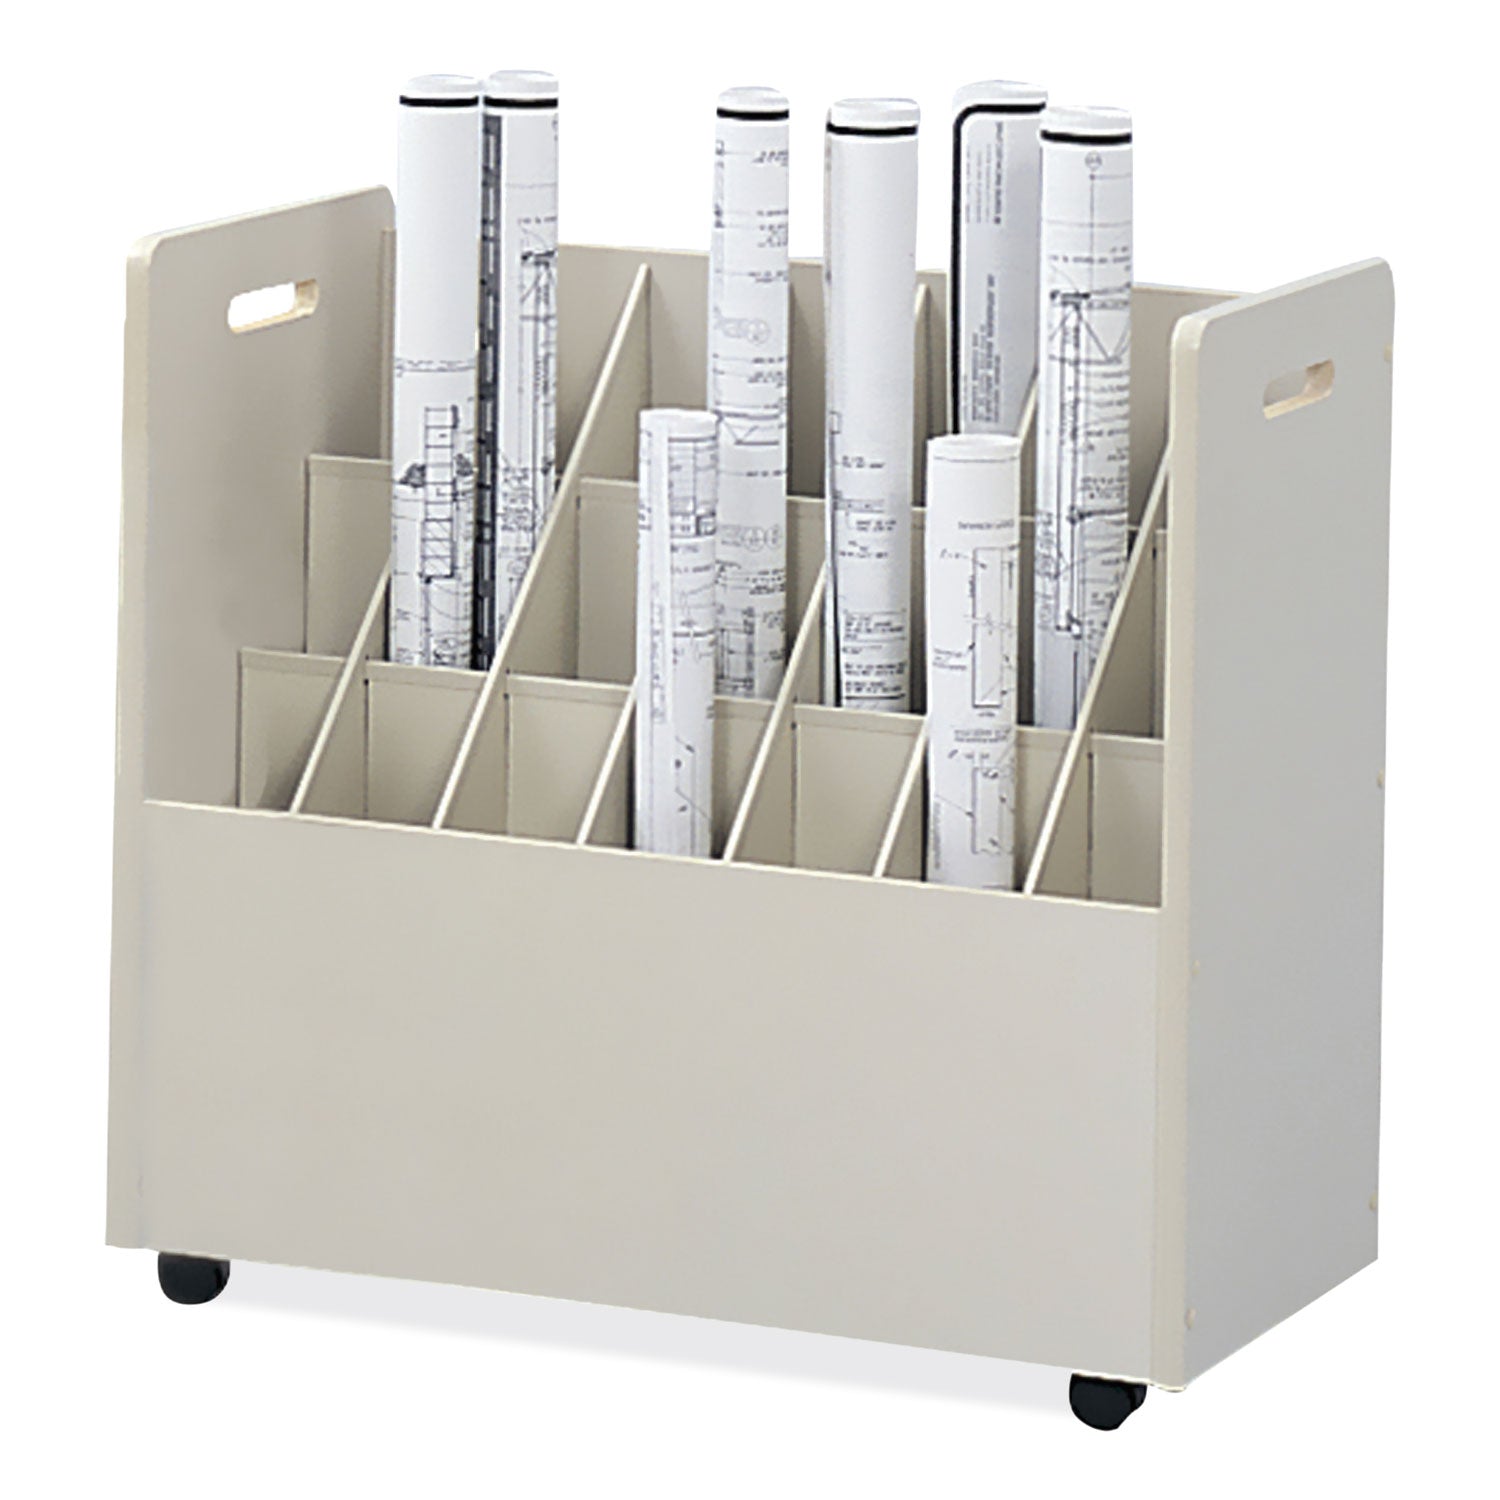 mobile-roll-file-21-compartments-3025w-x-1575d-x-2925h-tan-ships-in-1-3-business-days_saf3043 - 3